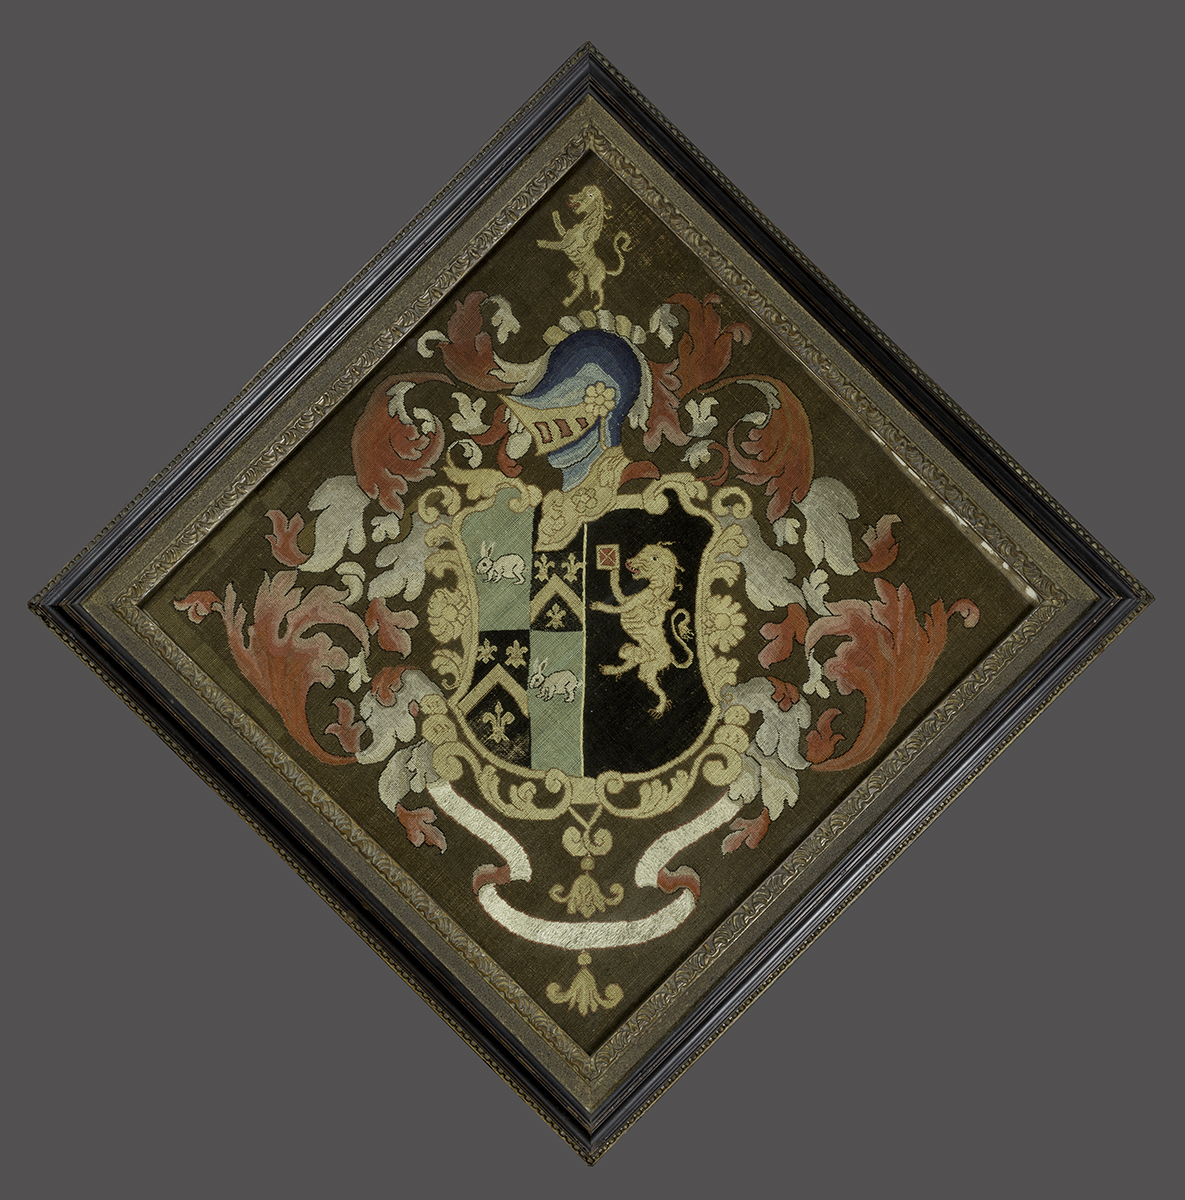 1953.0171.001 A, B Coat of Arms and Frame